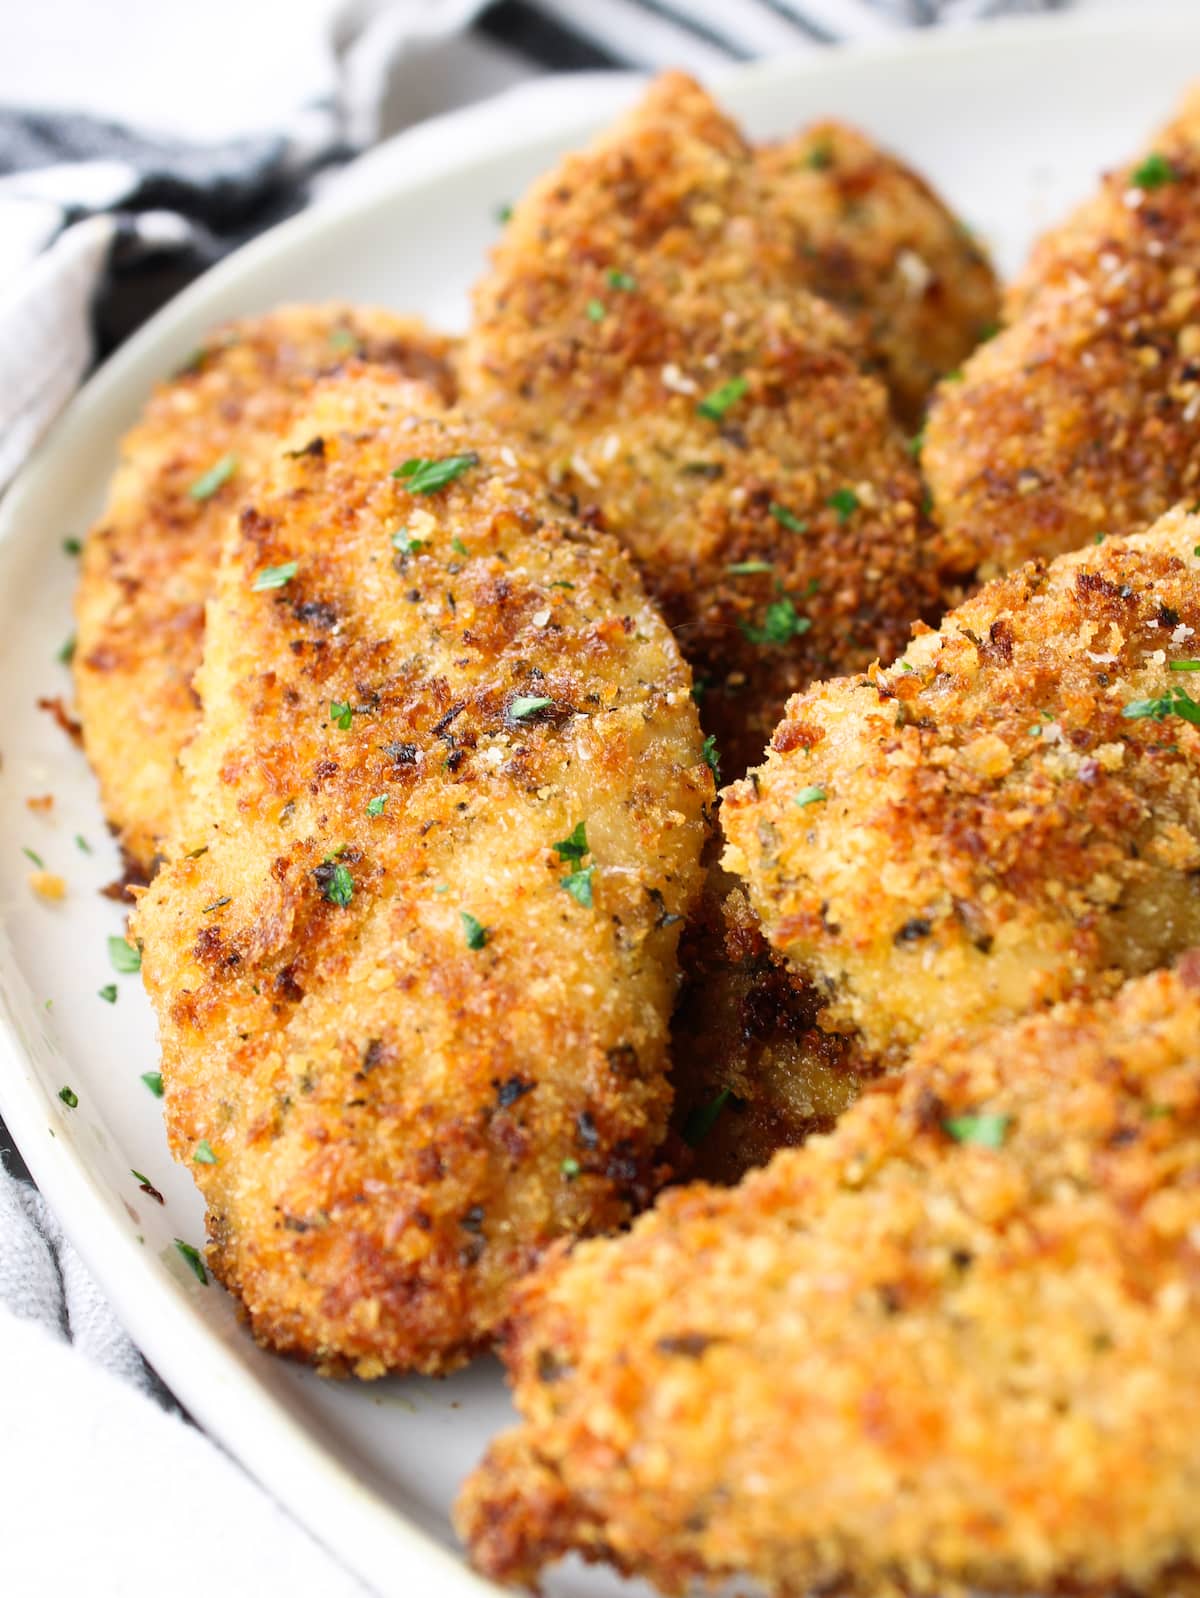 A close-up photo of baked parmesan chicken tenders on a plate.